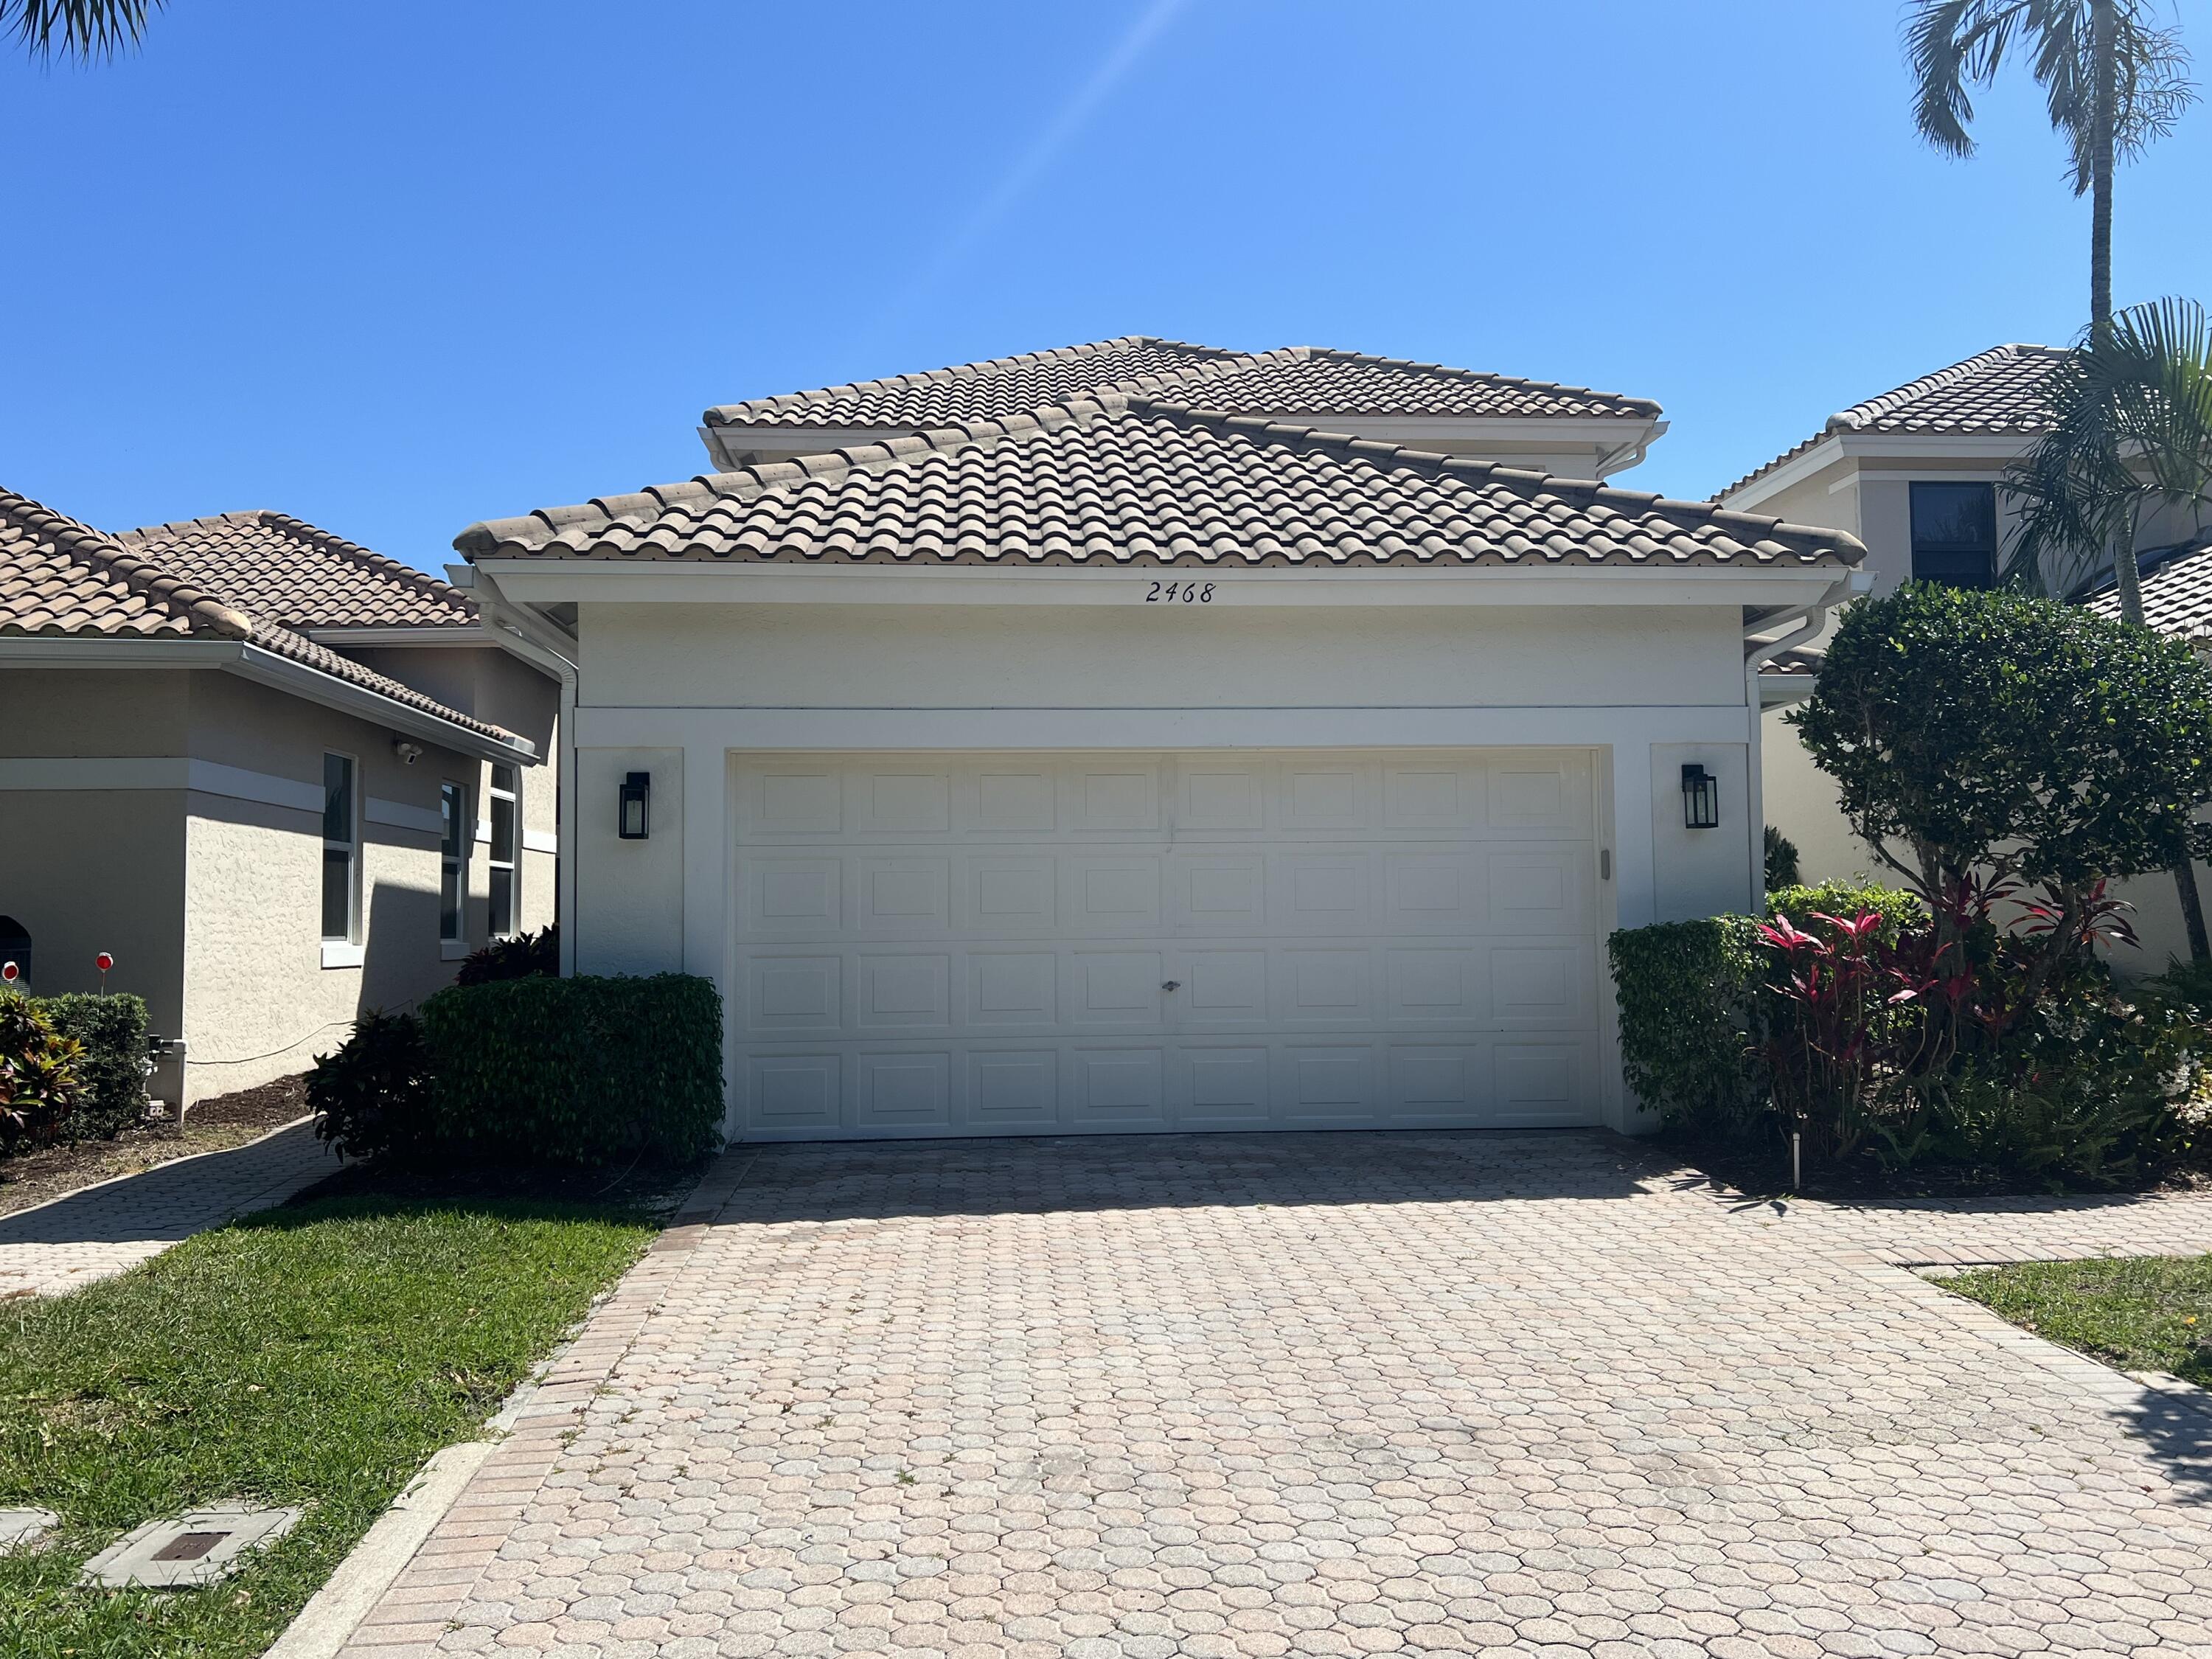 Property for Sale at 2468 Nw 67th Street Street, Boca Raton, Palm Beach County, Florida - Bedrooms: 3 
Bathrooms: 2.5  - $925,000